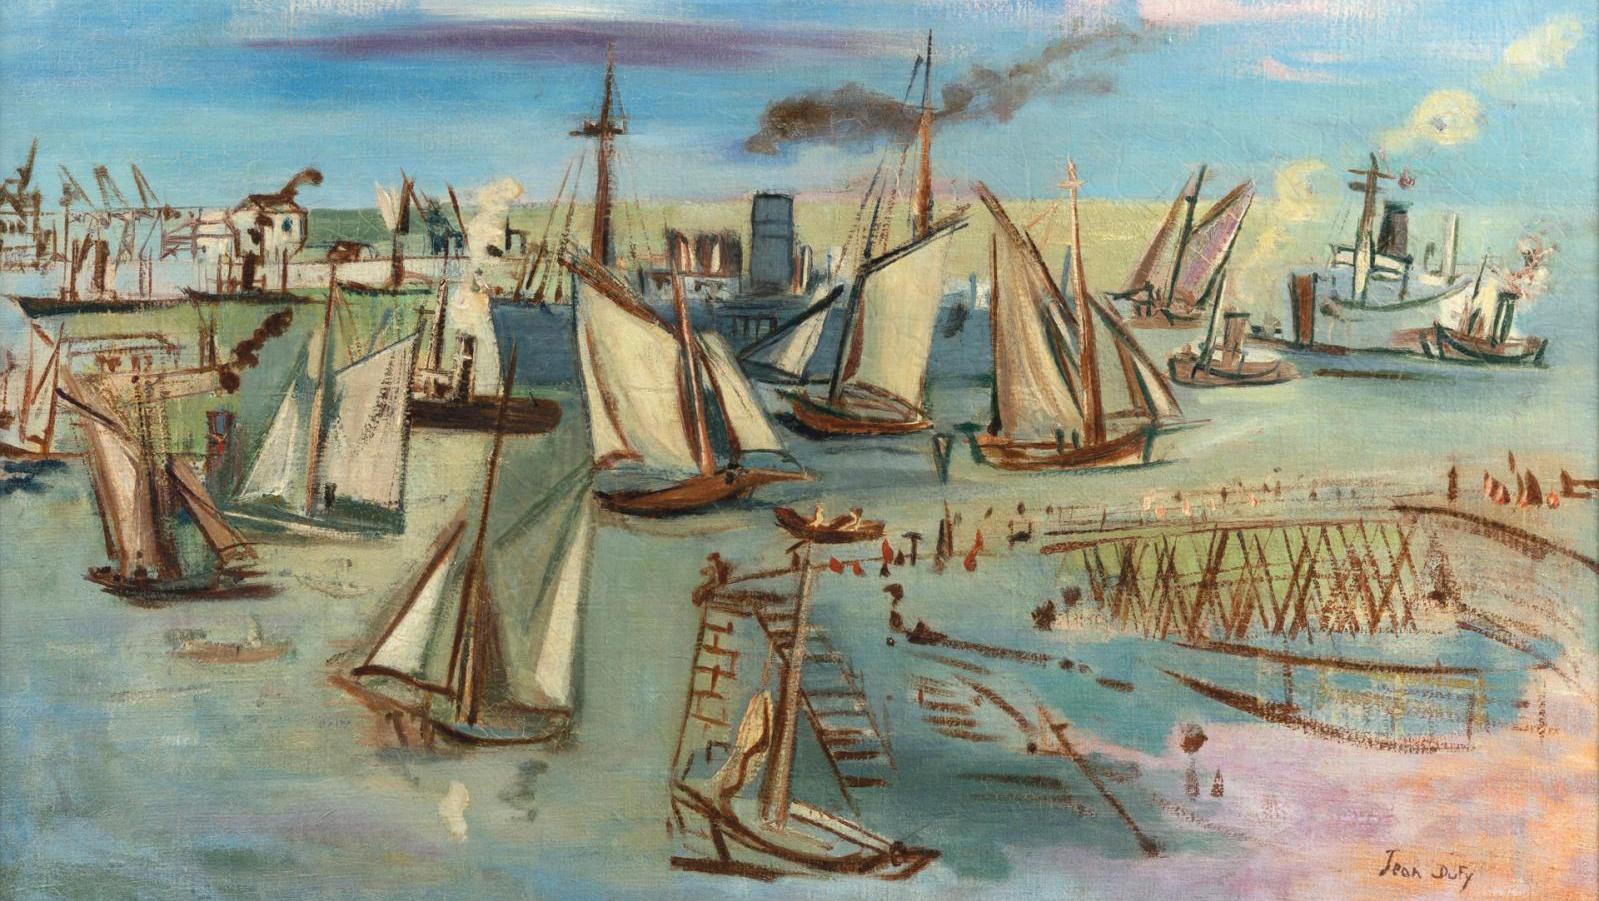 Jean Dufy (1888-1964), The English Channel Basin in Le Havre, oil on canvas, 73 x... When the Sea Inspired Jean Dufy 